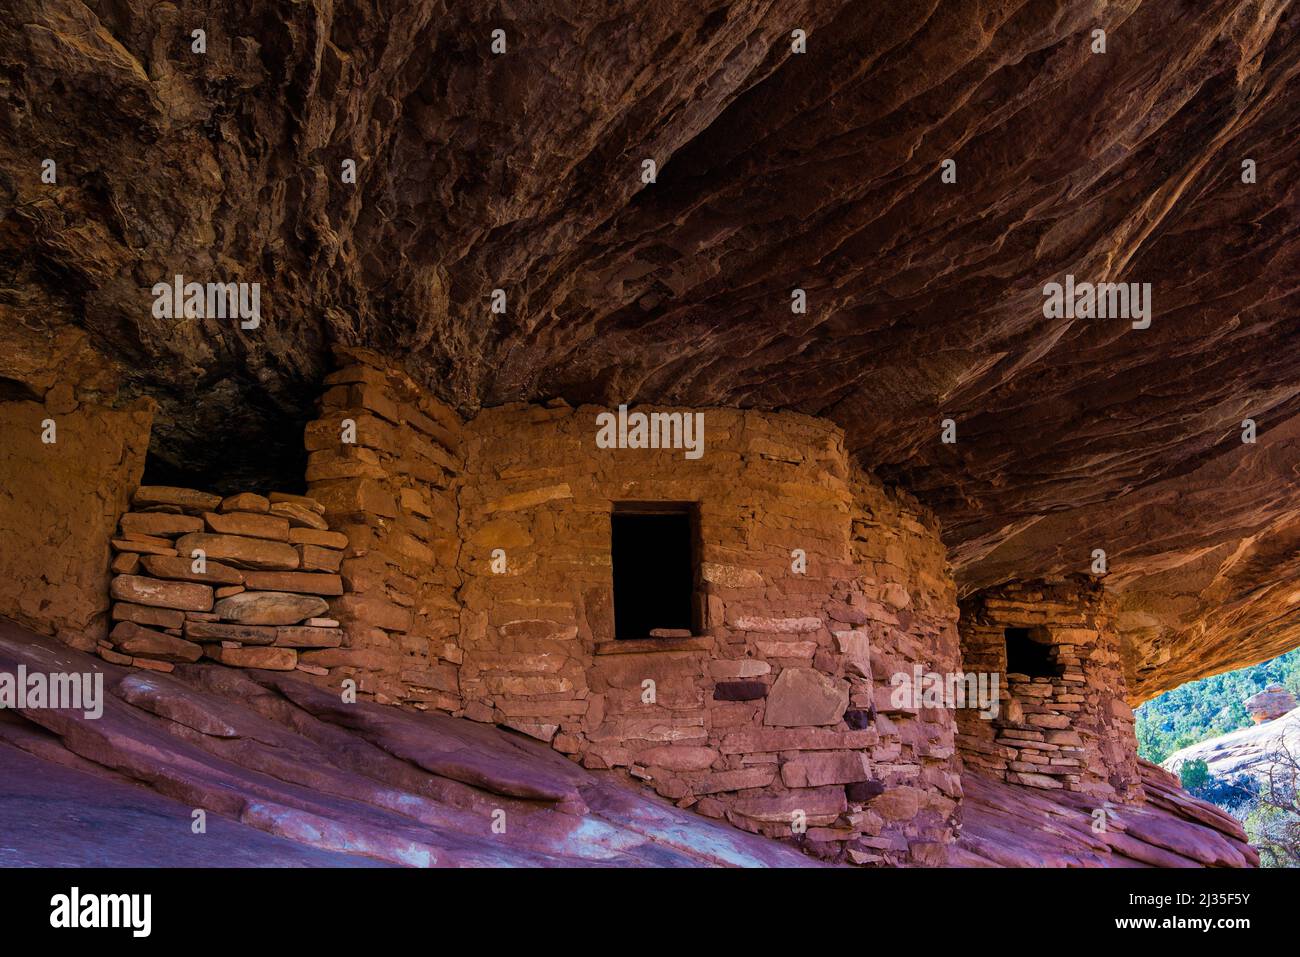 Ancient Puebloan ruins called House On Fire Ruins.  Located in Bears Ears National Monument, Utah, USA.  Est. 1300 CE. Stock Photo